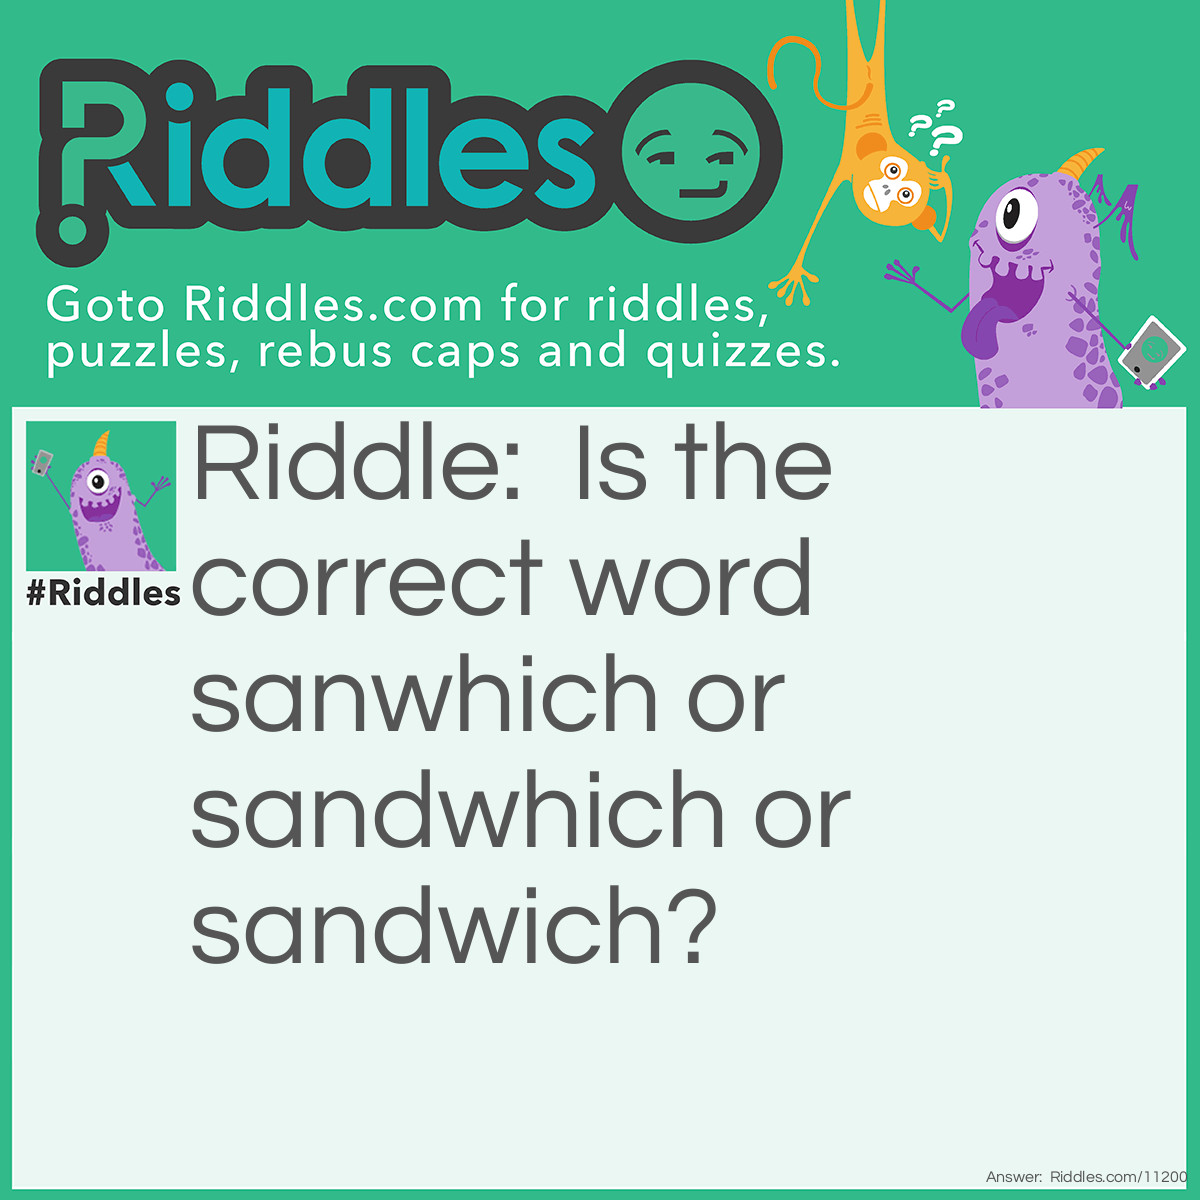 Riddle: Is the correct word sanwhich or sandwhich or sandwich? Answer: The correct answer is sandwich.